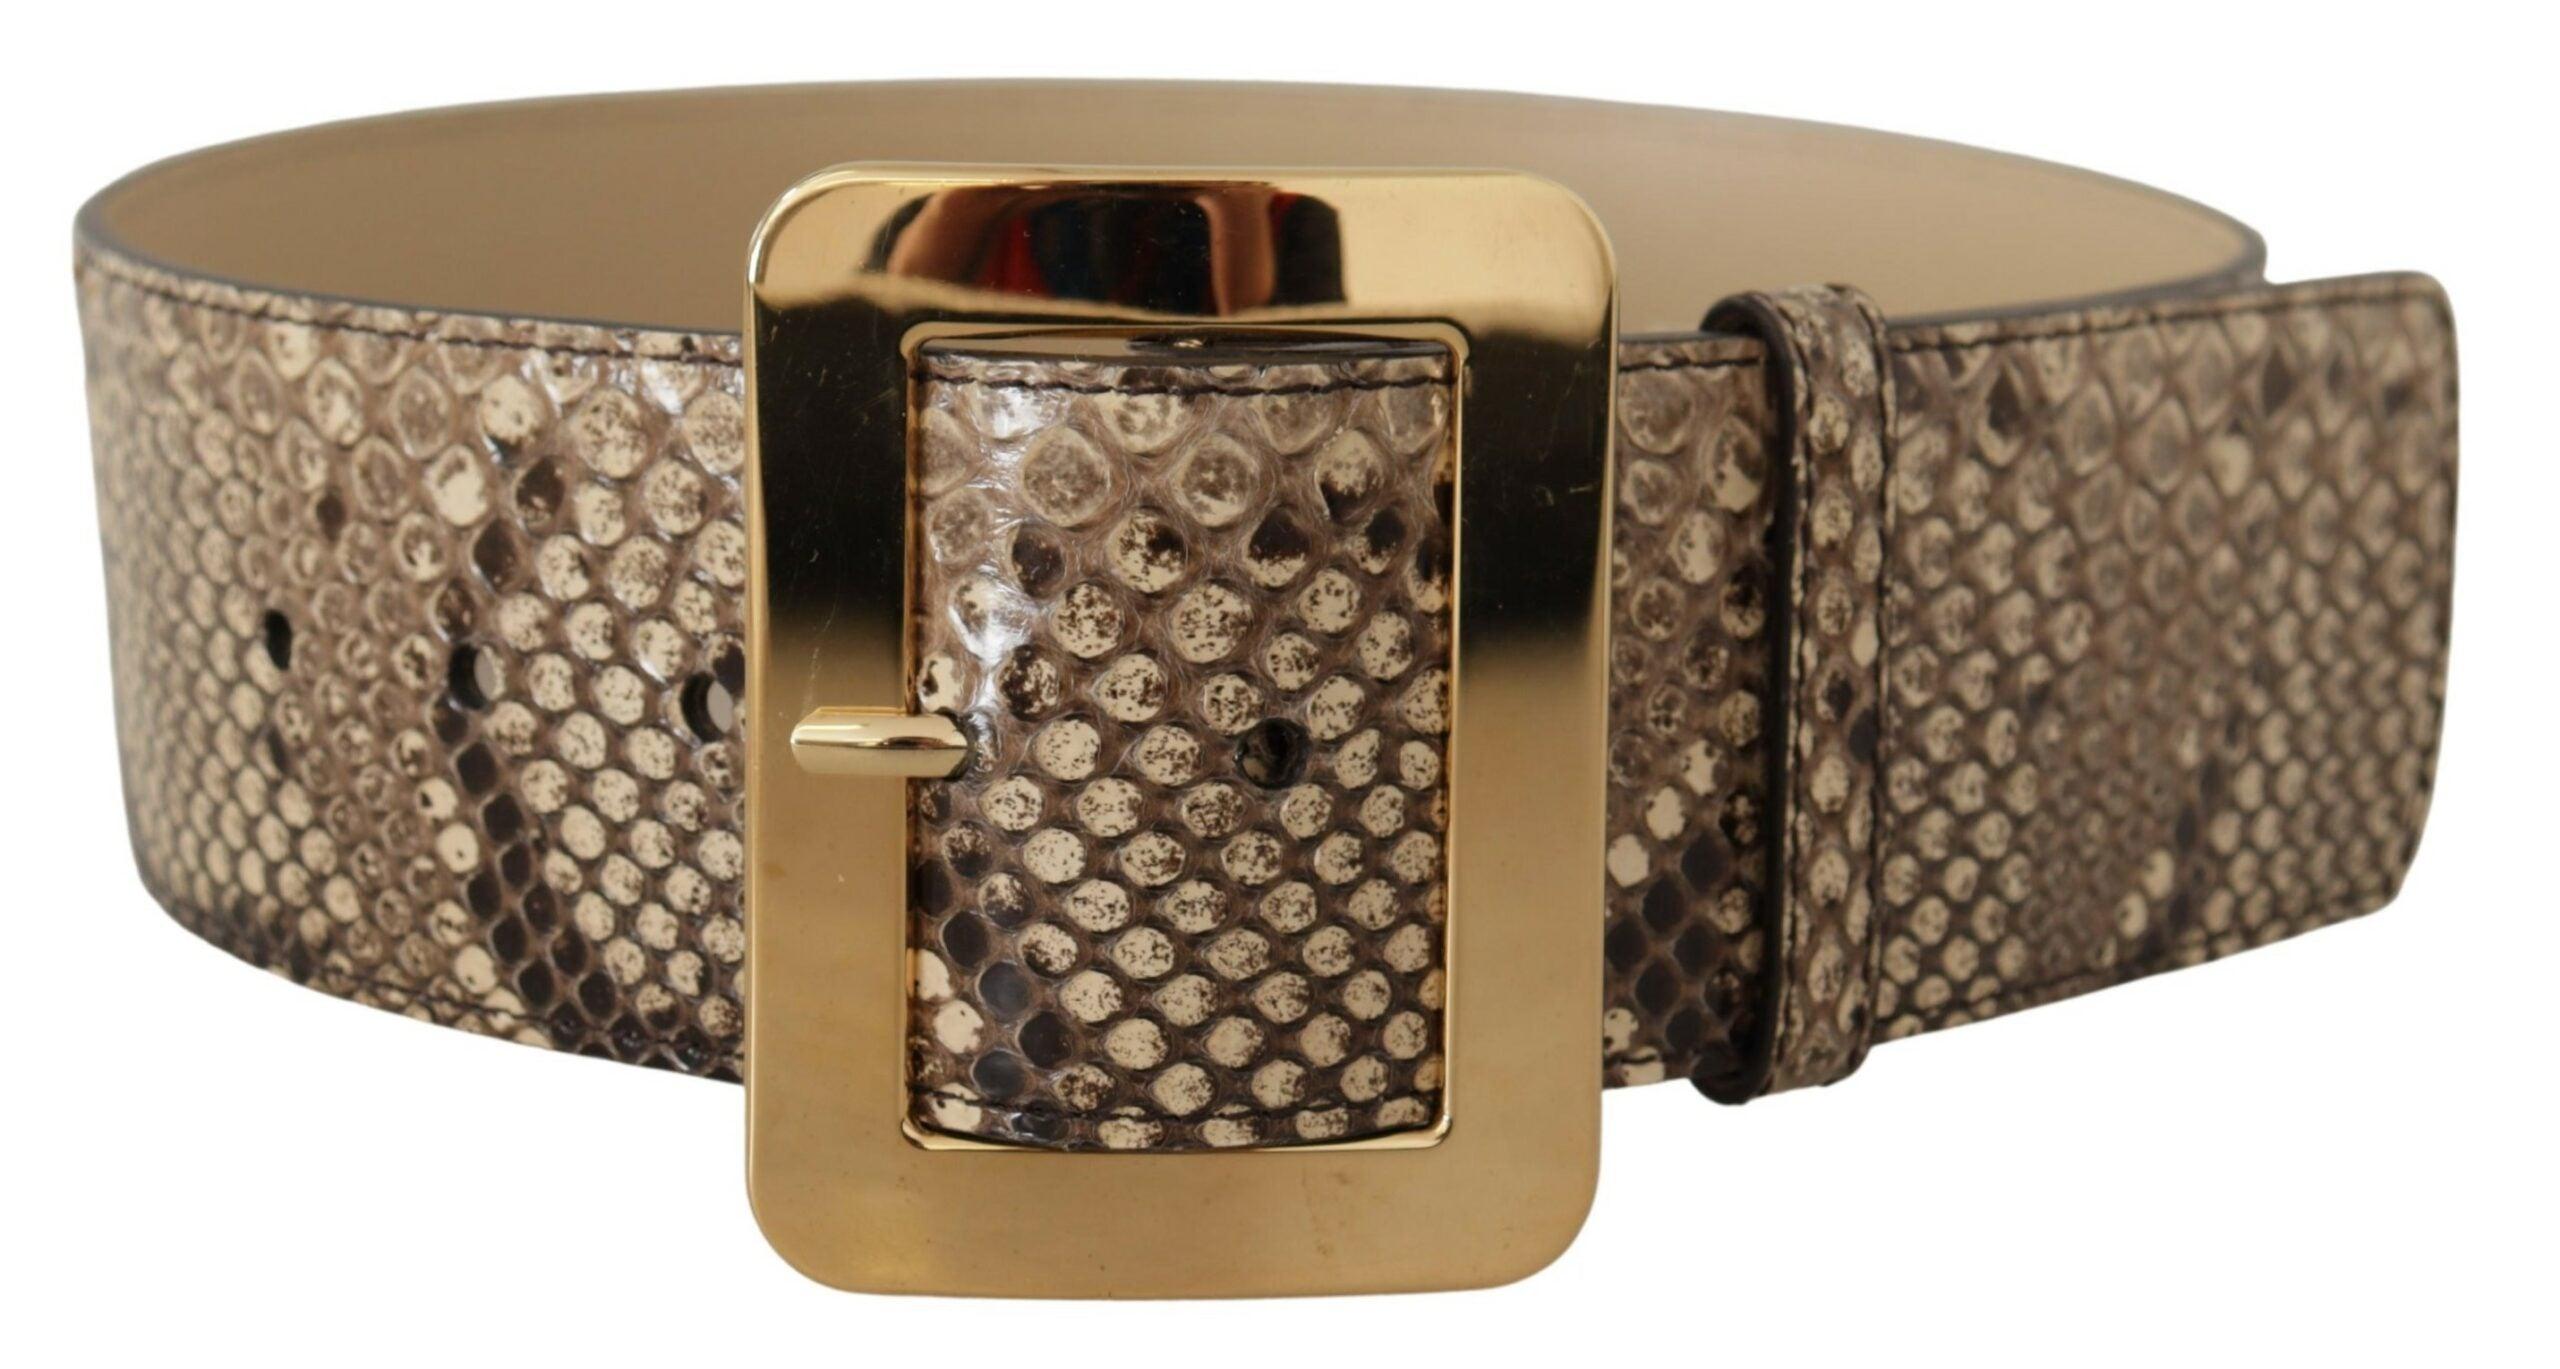 Elegant Leather Belt with Engraved Buckle - Divitiae Glamour